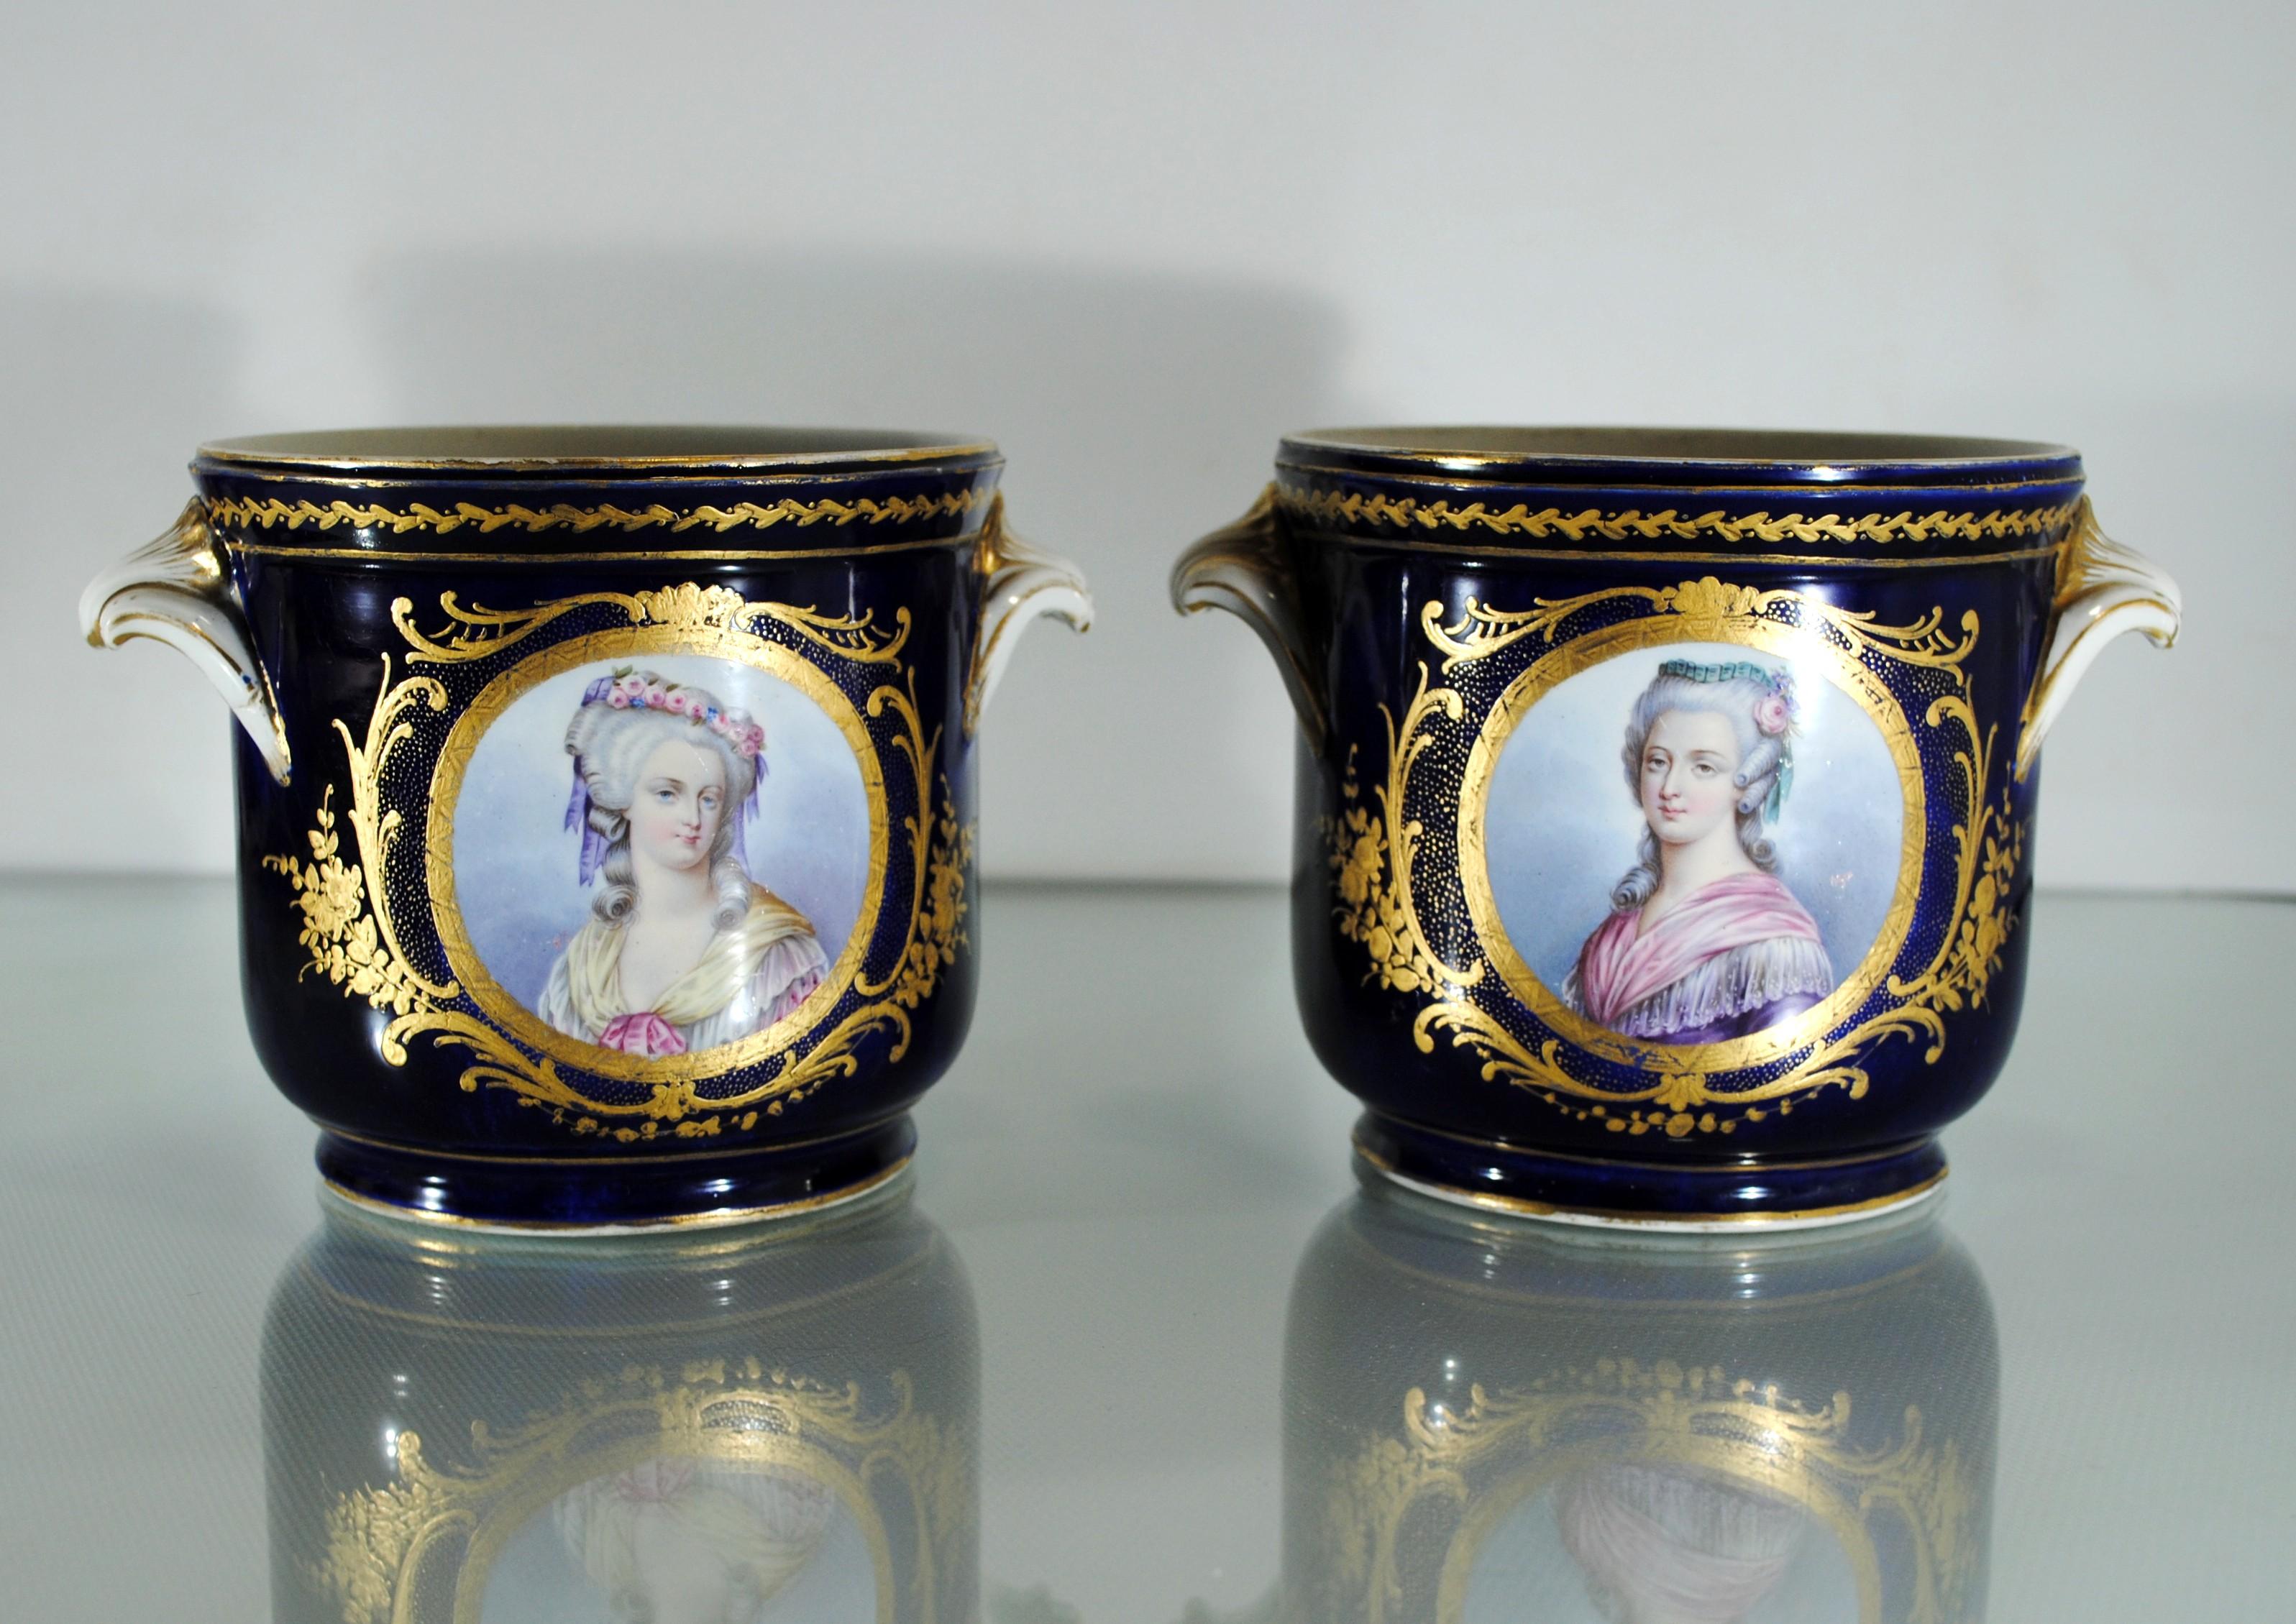 Rare pair of early 19th century porcelain wine glass coolers, circa 1820. Decorated with two medallions of miniature portraits of illustrious women on the front and floral monograms 